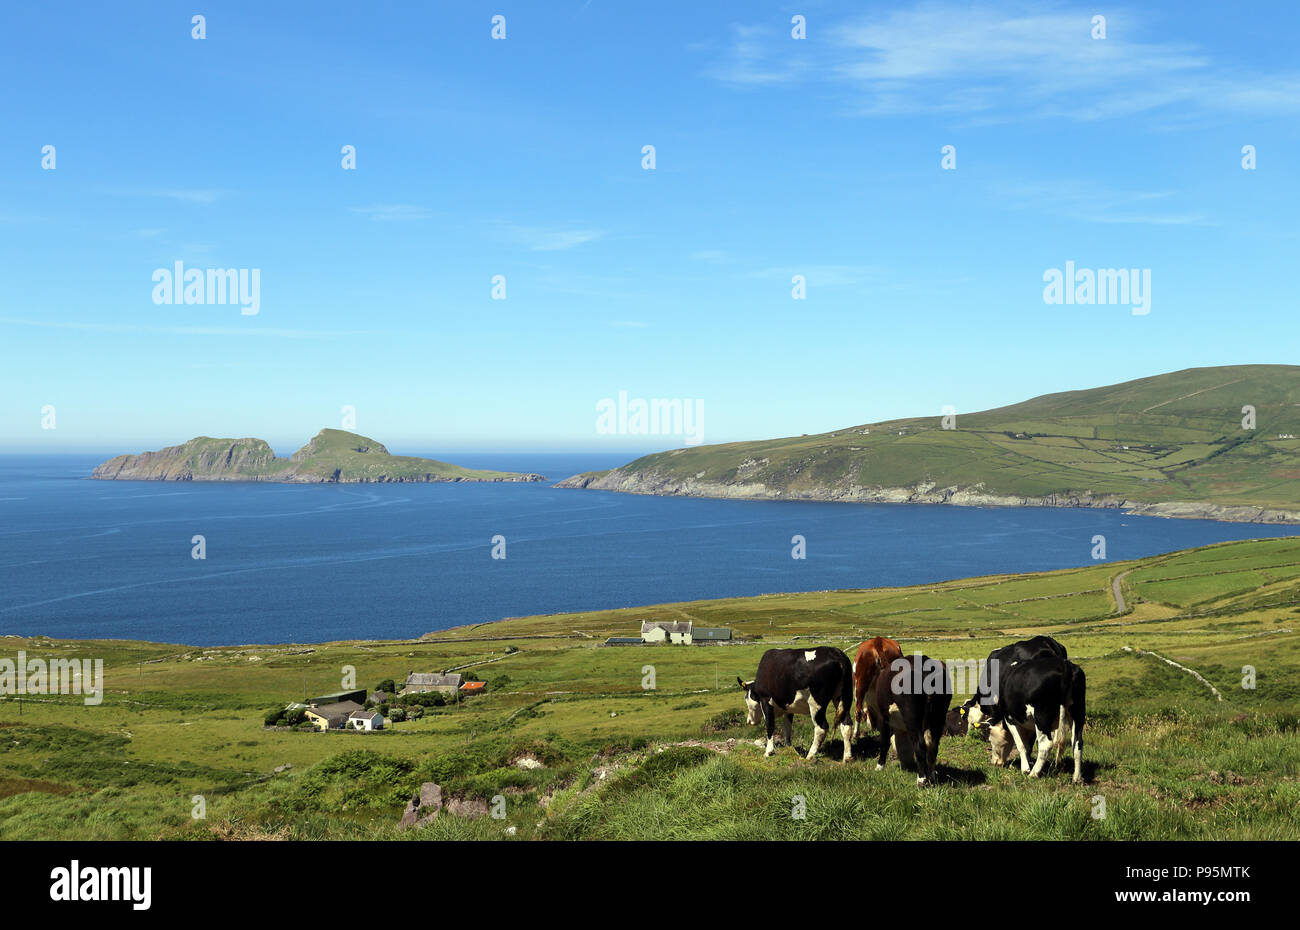 Cows graze in a field along the coast of County Kerry, Ireland. Stock Photo